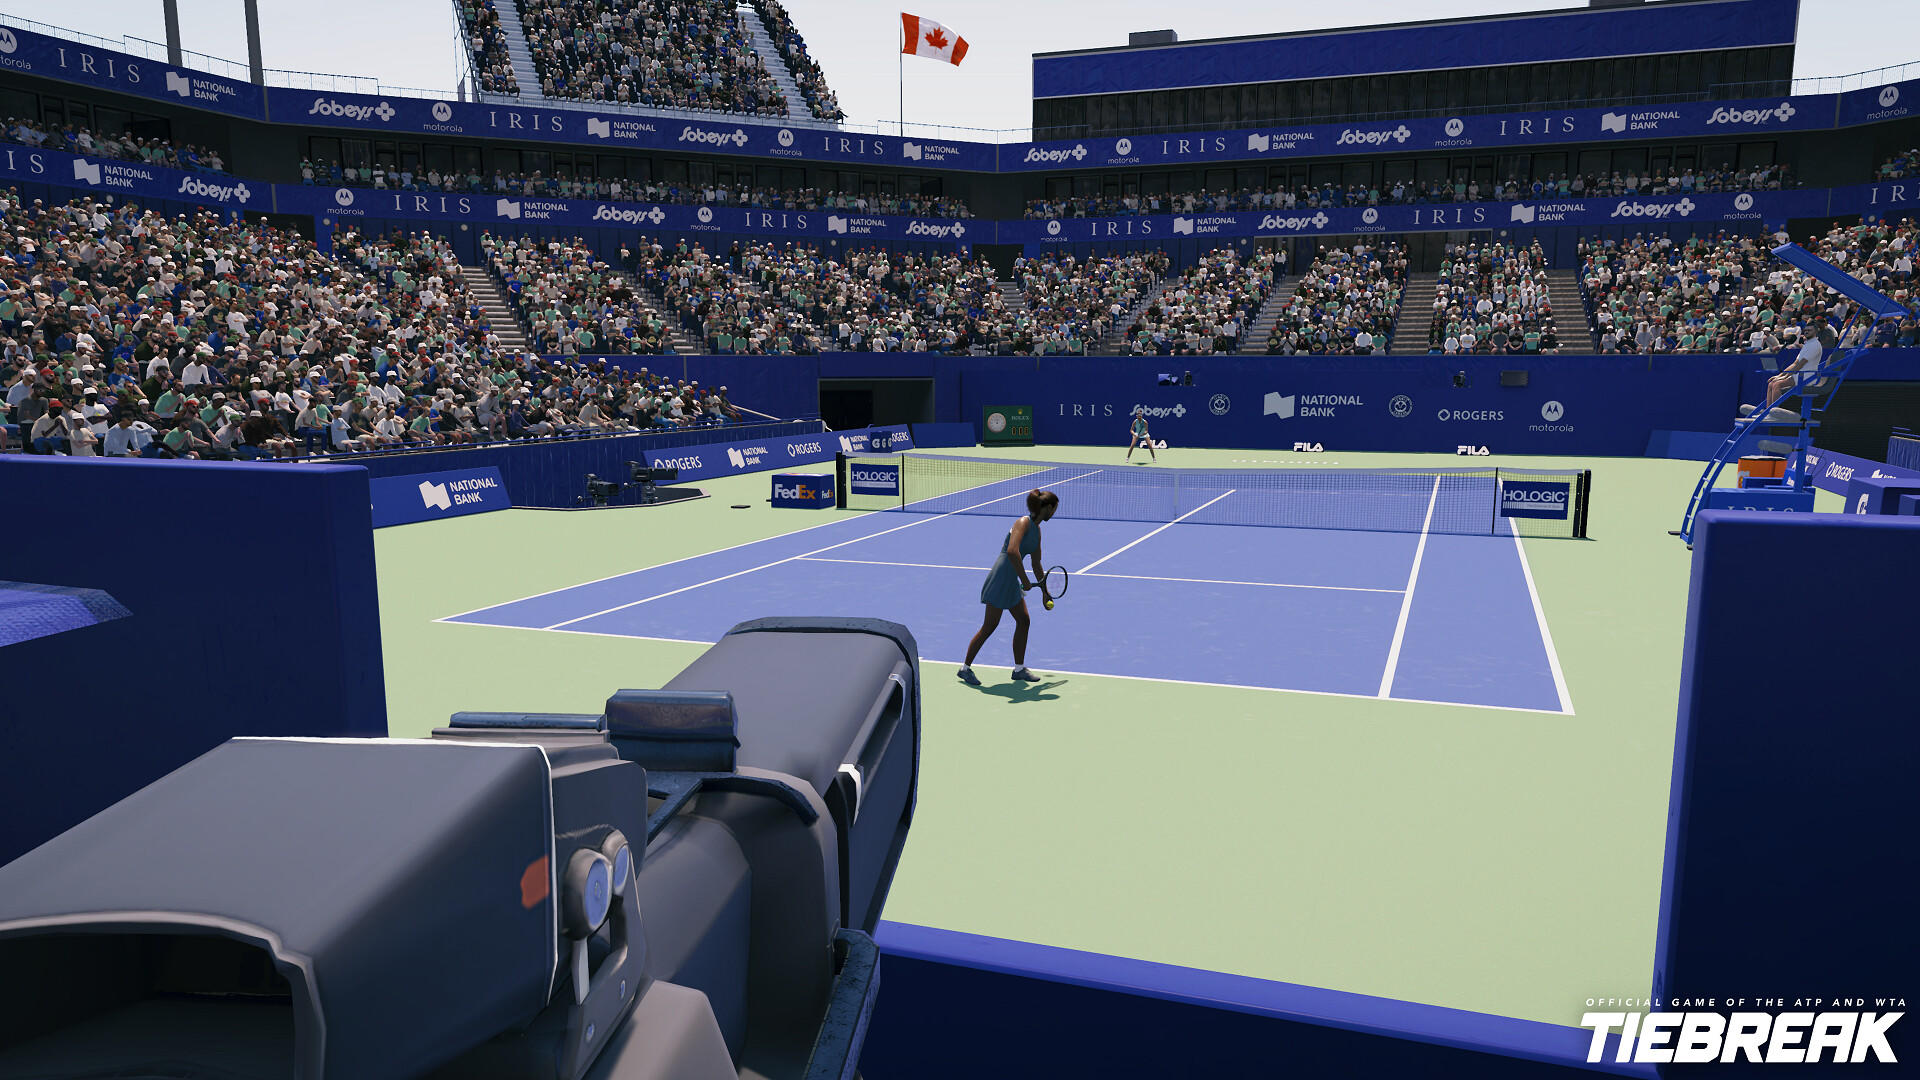 TIEBREAK: Official game of the ATP and WTA screenshot game